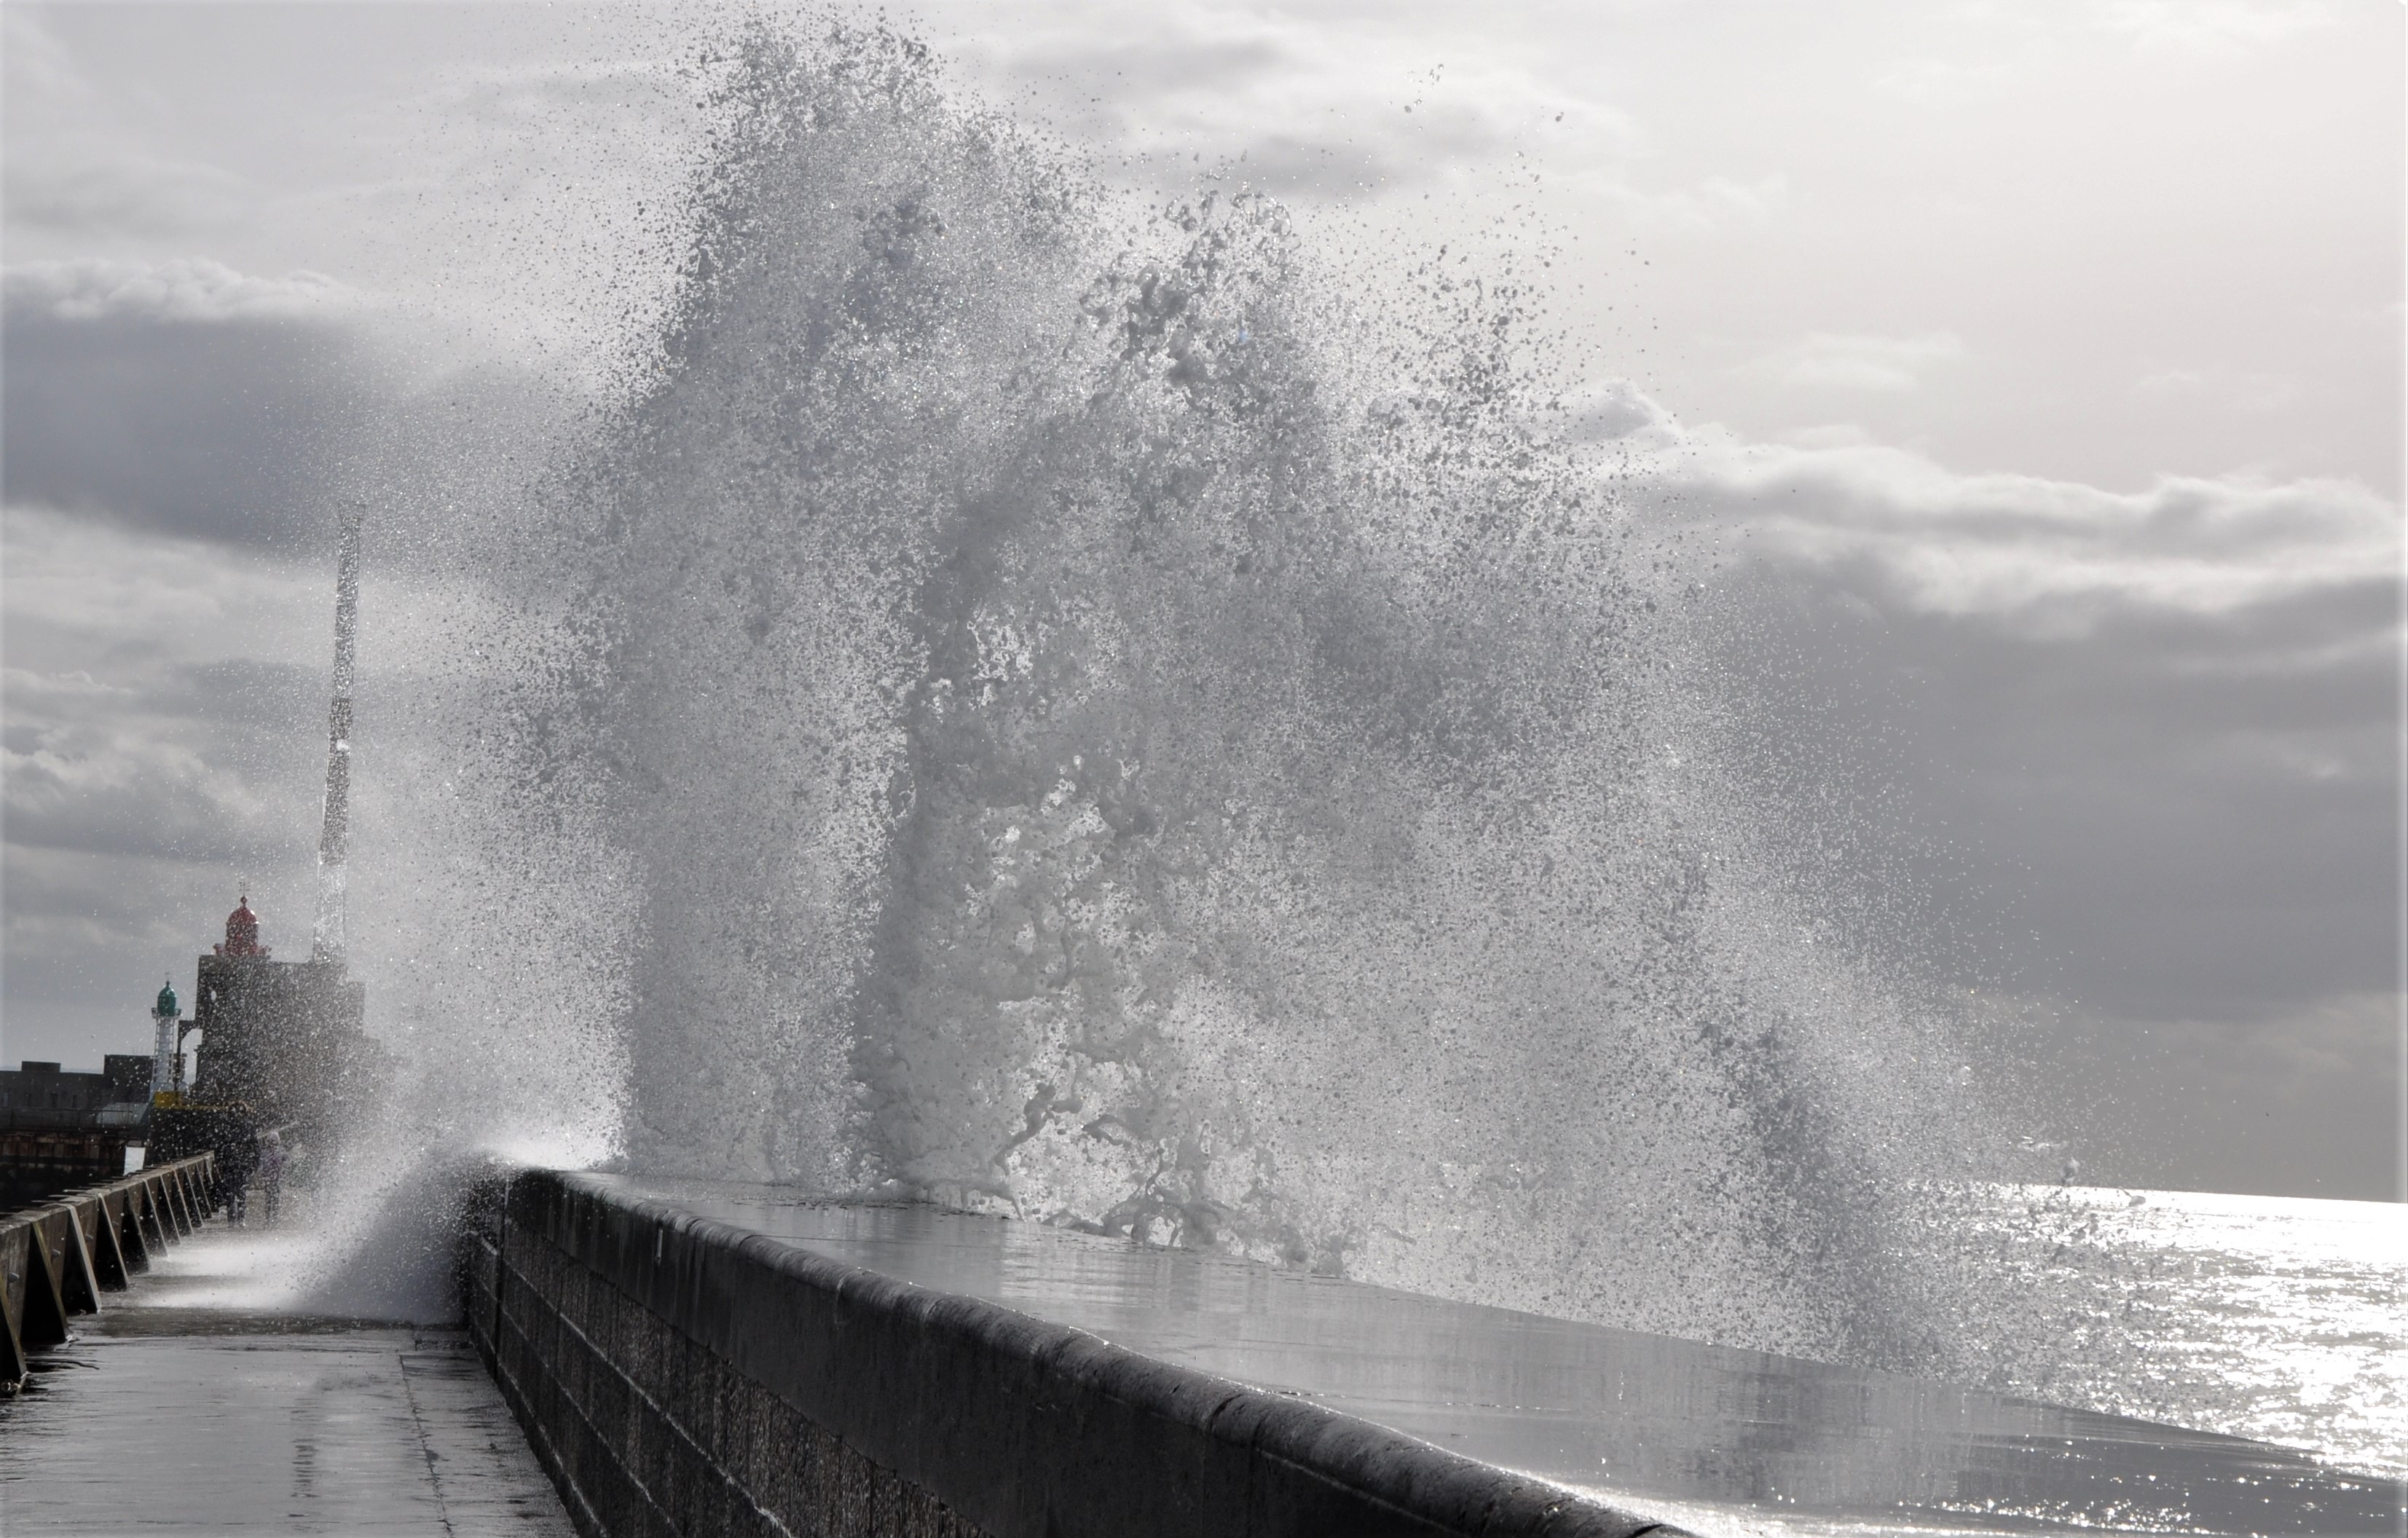 Sea storm in France